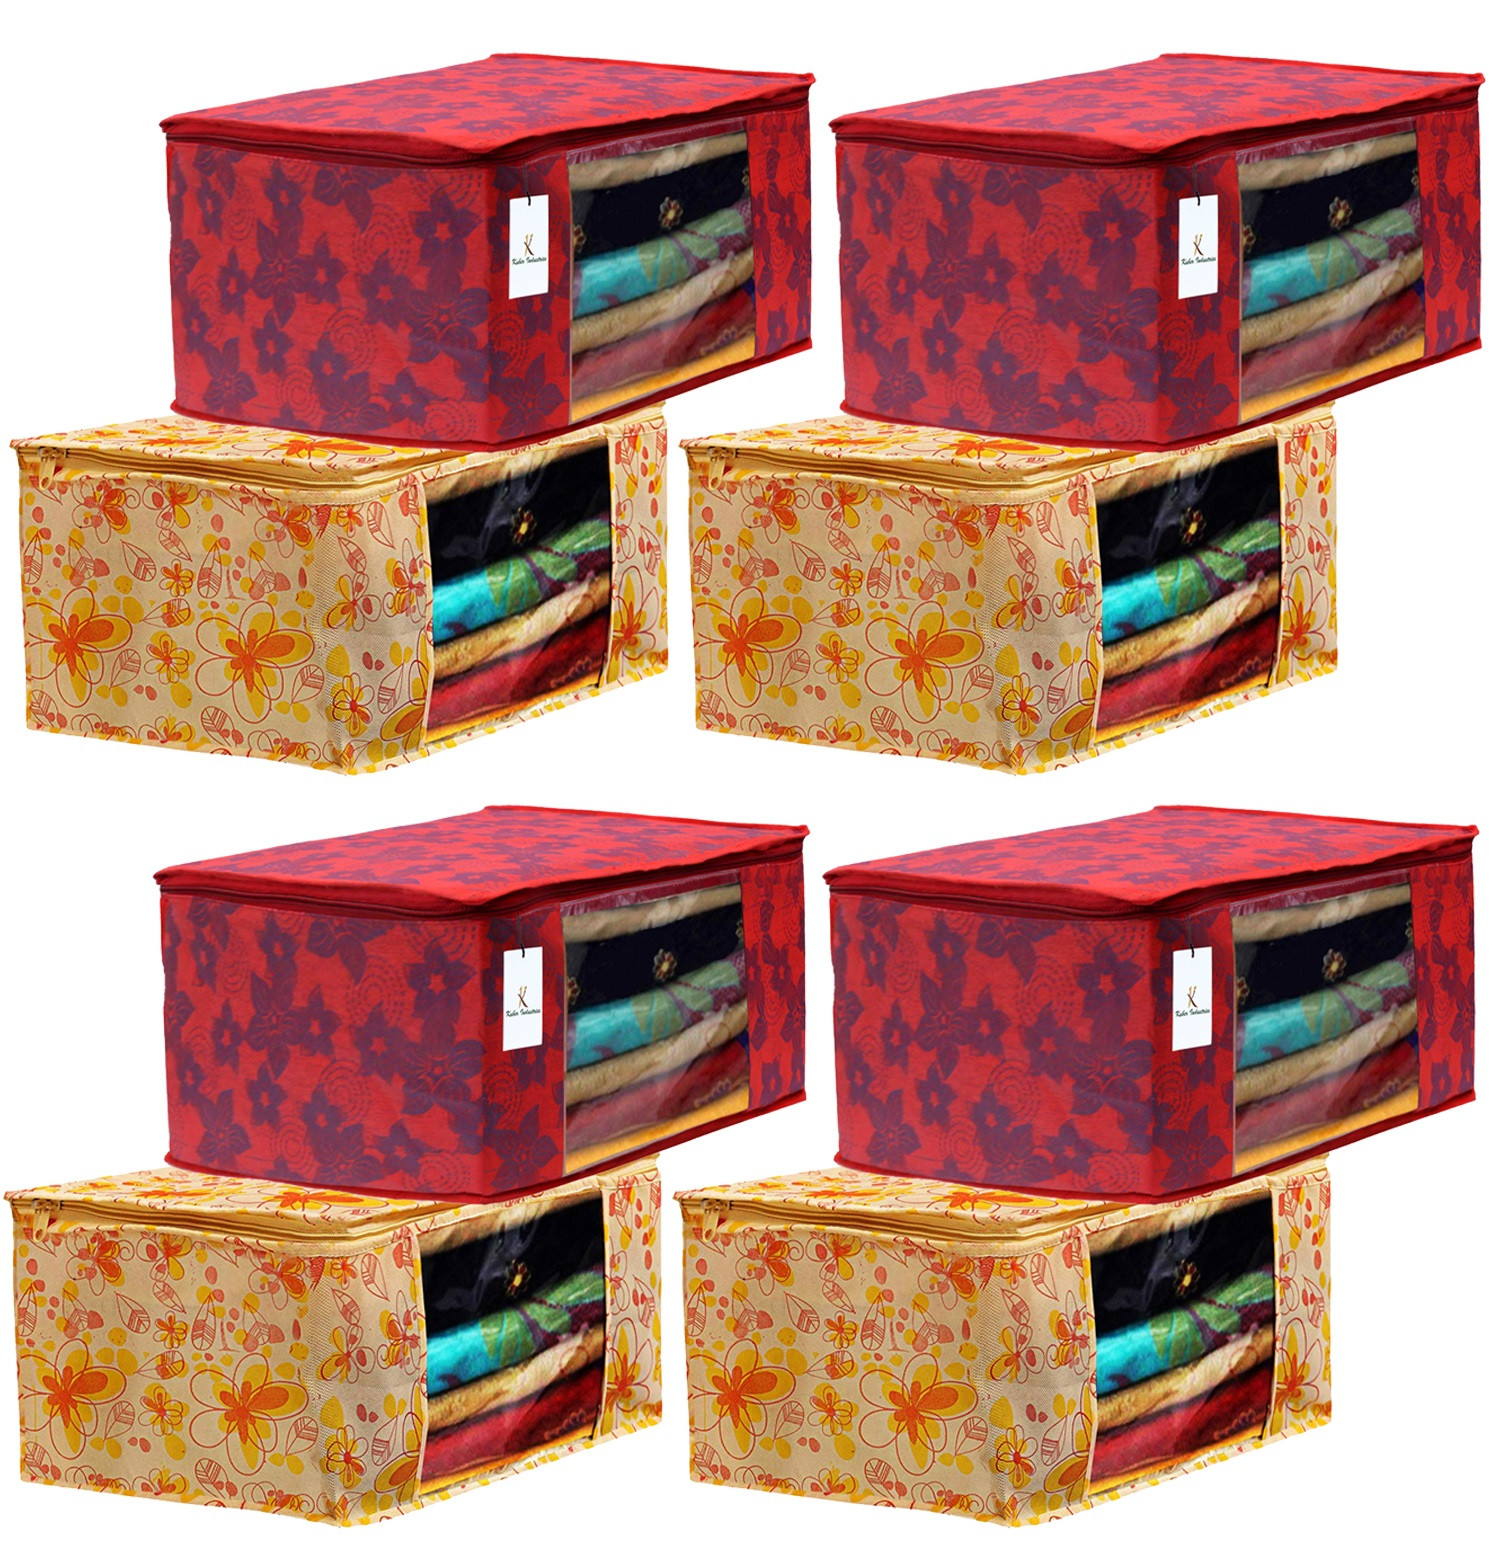 Kuber Industries Metalic Printed Non Woven Fabric Saree Cover Set with Transparent Window, Extra Large, Ivory Red & Red -CTKTC40769